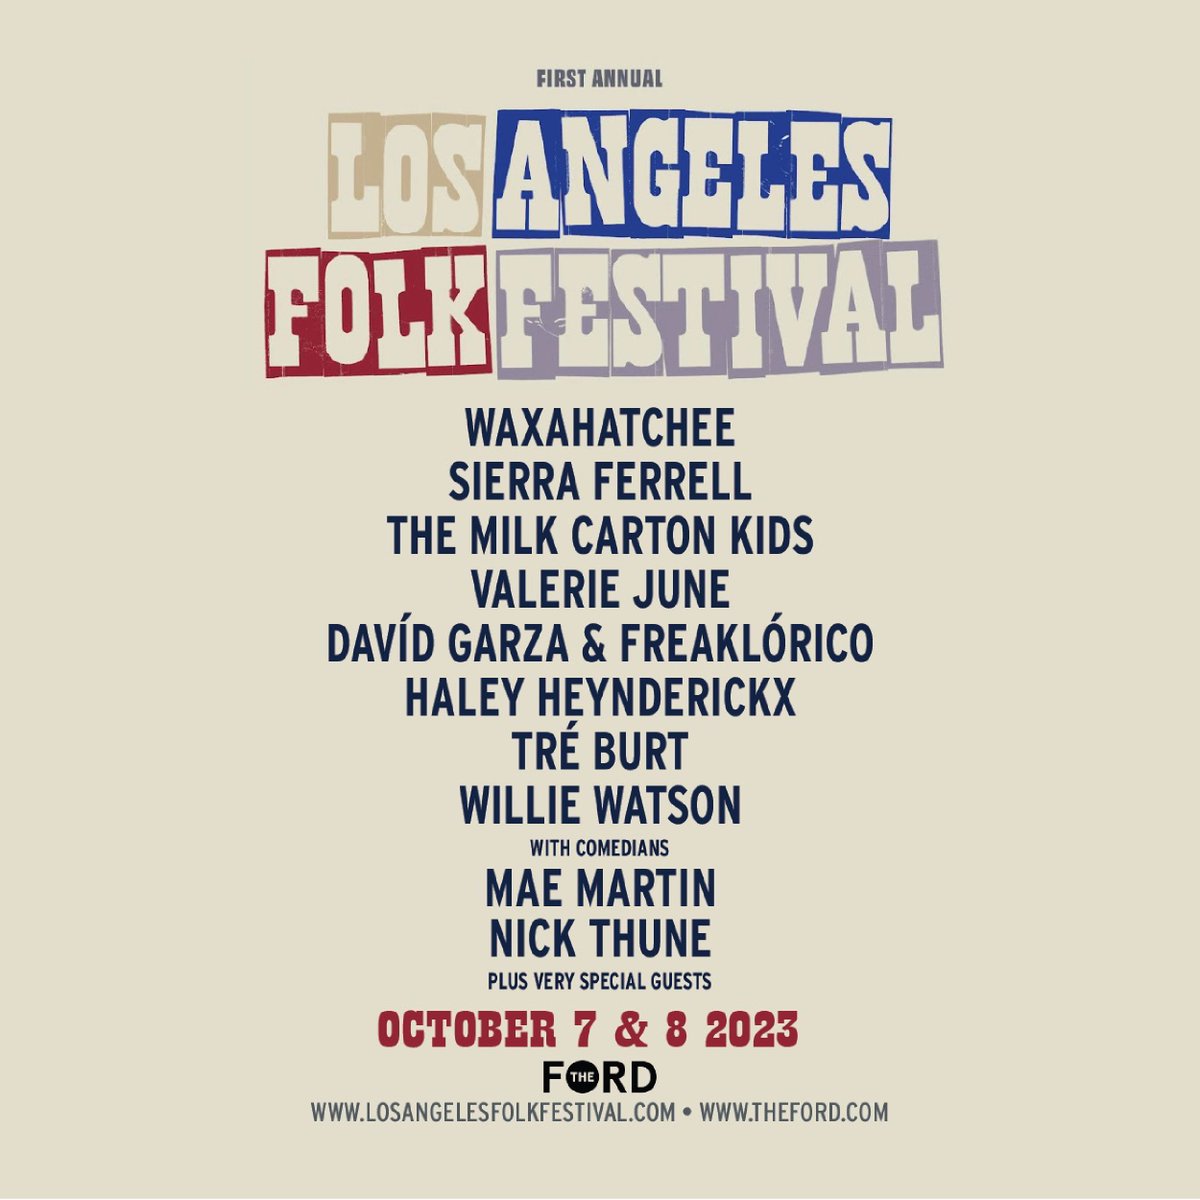 Expanded Los Angeles Folk Festival lineup now including comedy from @TheMaeMartin and @nickthune! Get tickets now and we’ll see you at @TheFordLA!